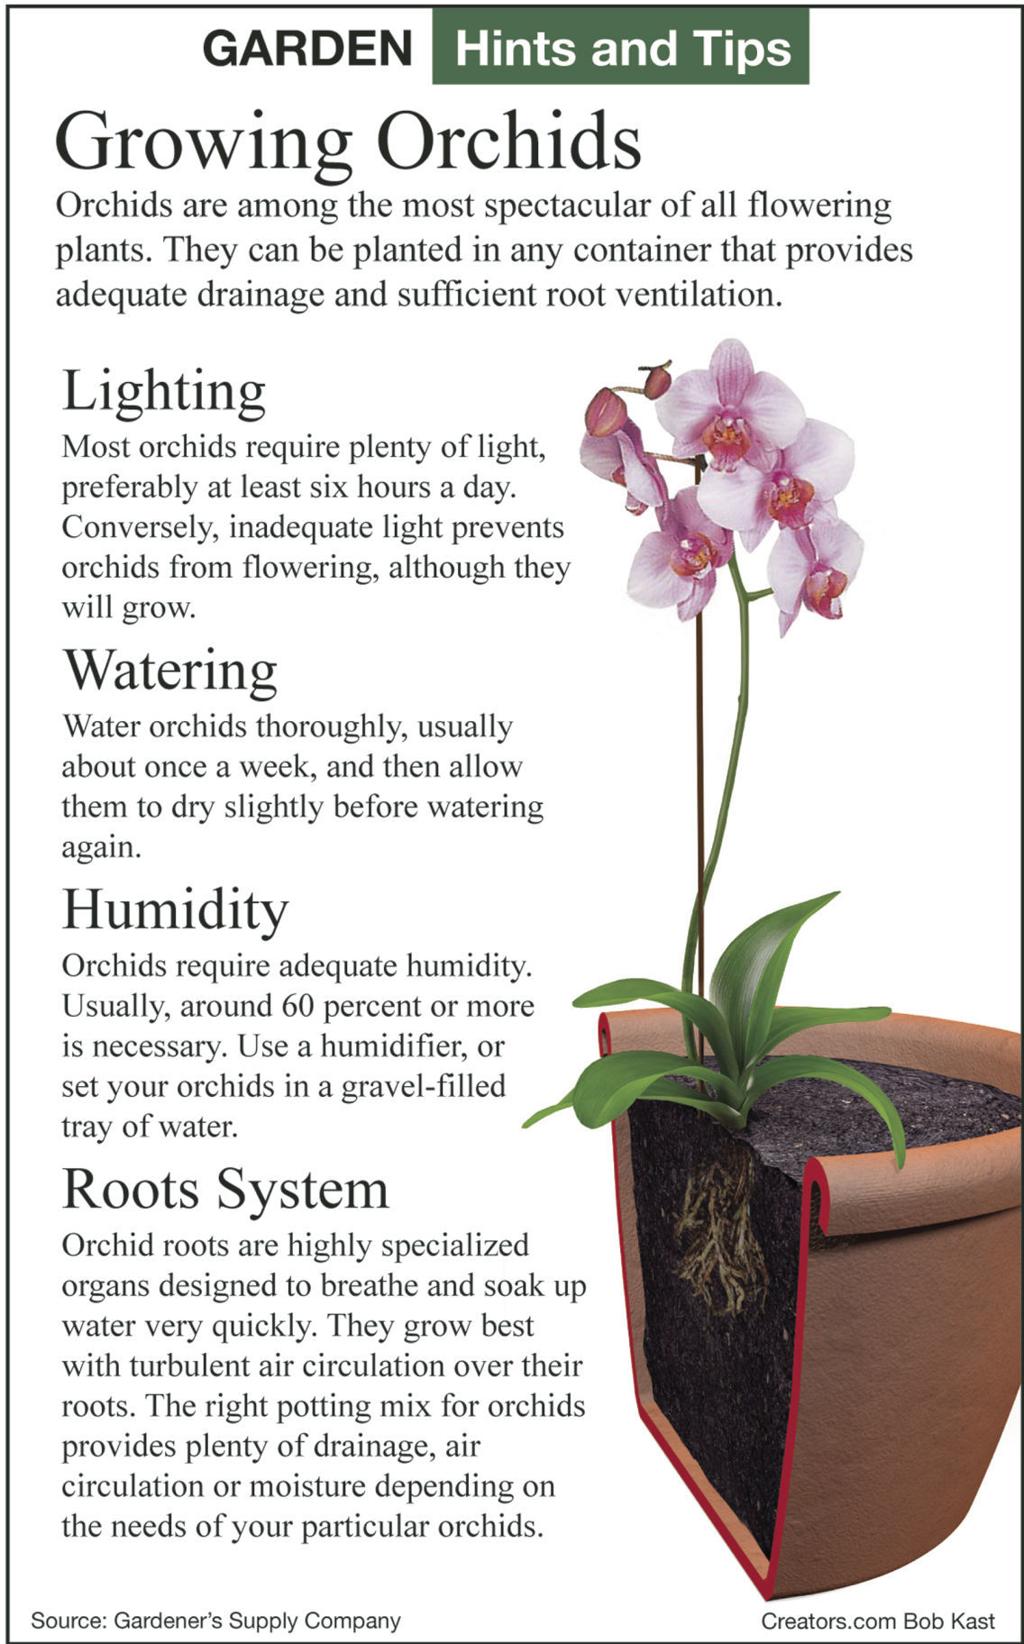 Tips For Repotting, Caring For Phals Orchids | Siouxland Homes | Siouxcityjournal.com